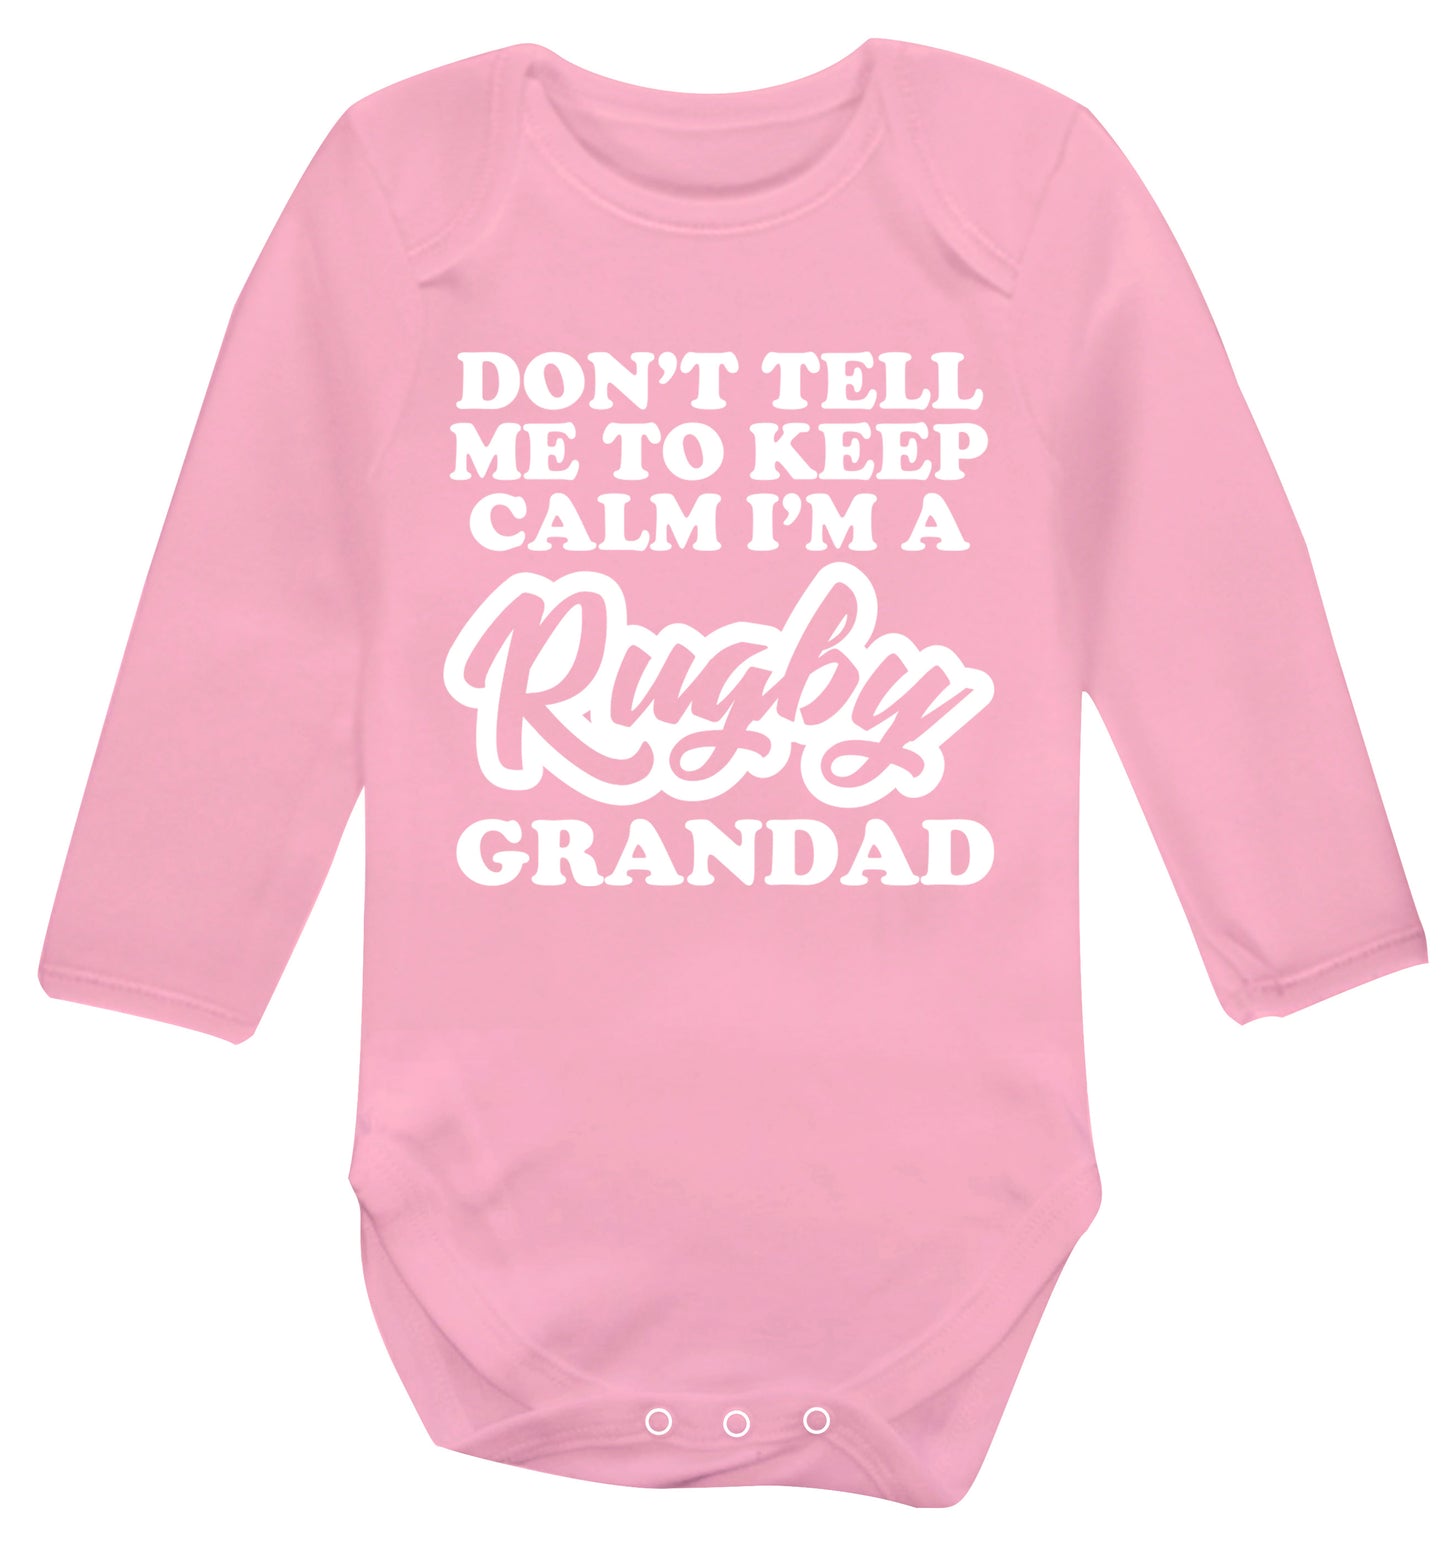 Don't tell me to keep calm I'm a rugby dad Baby Vest long sleeved pale pink 6-12 months